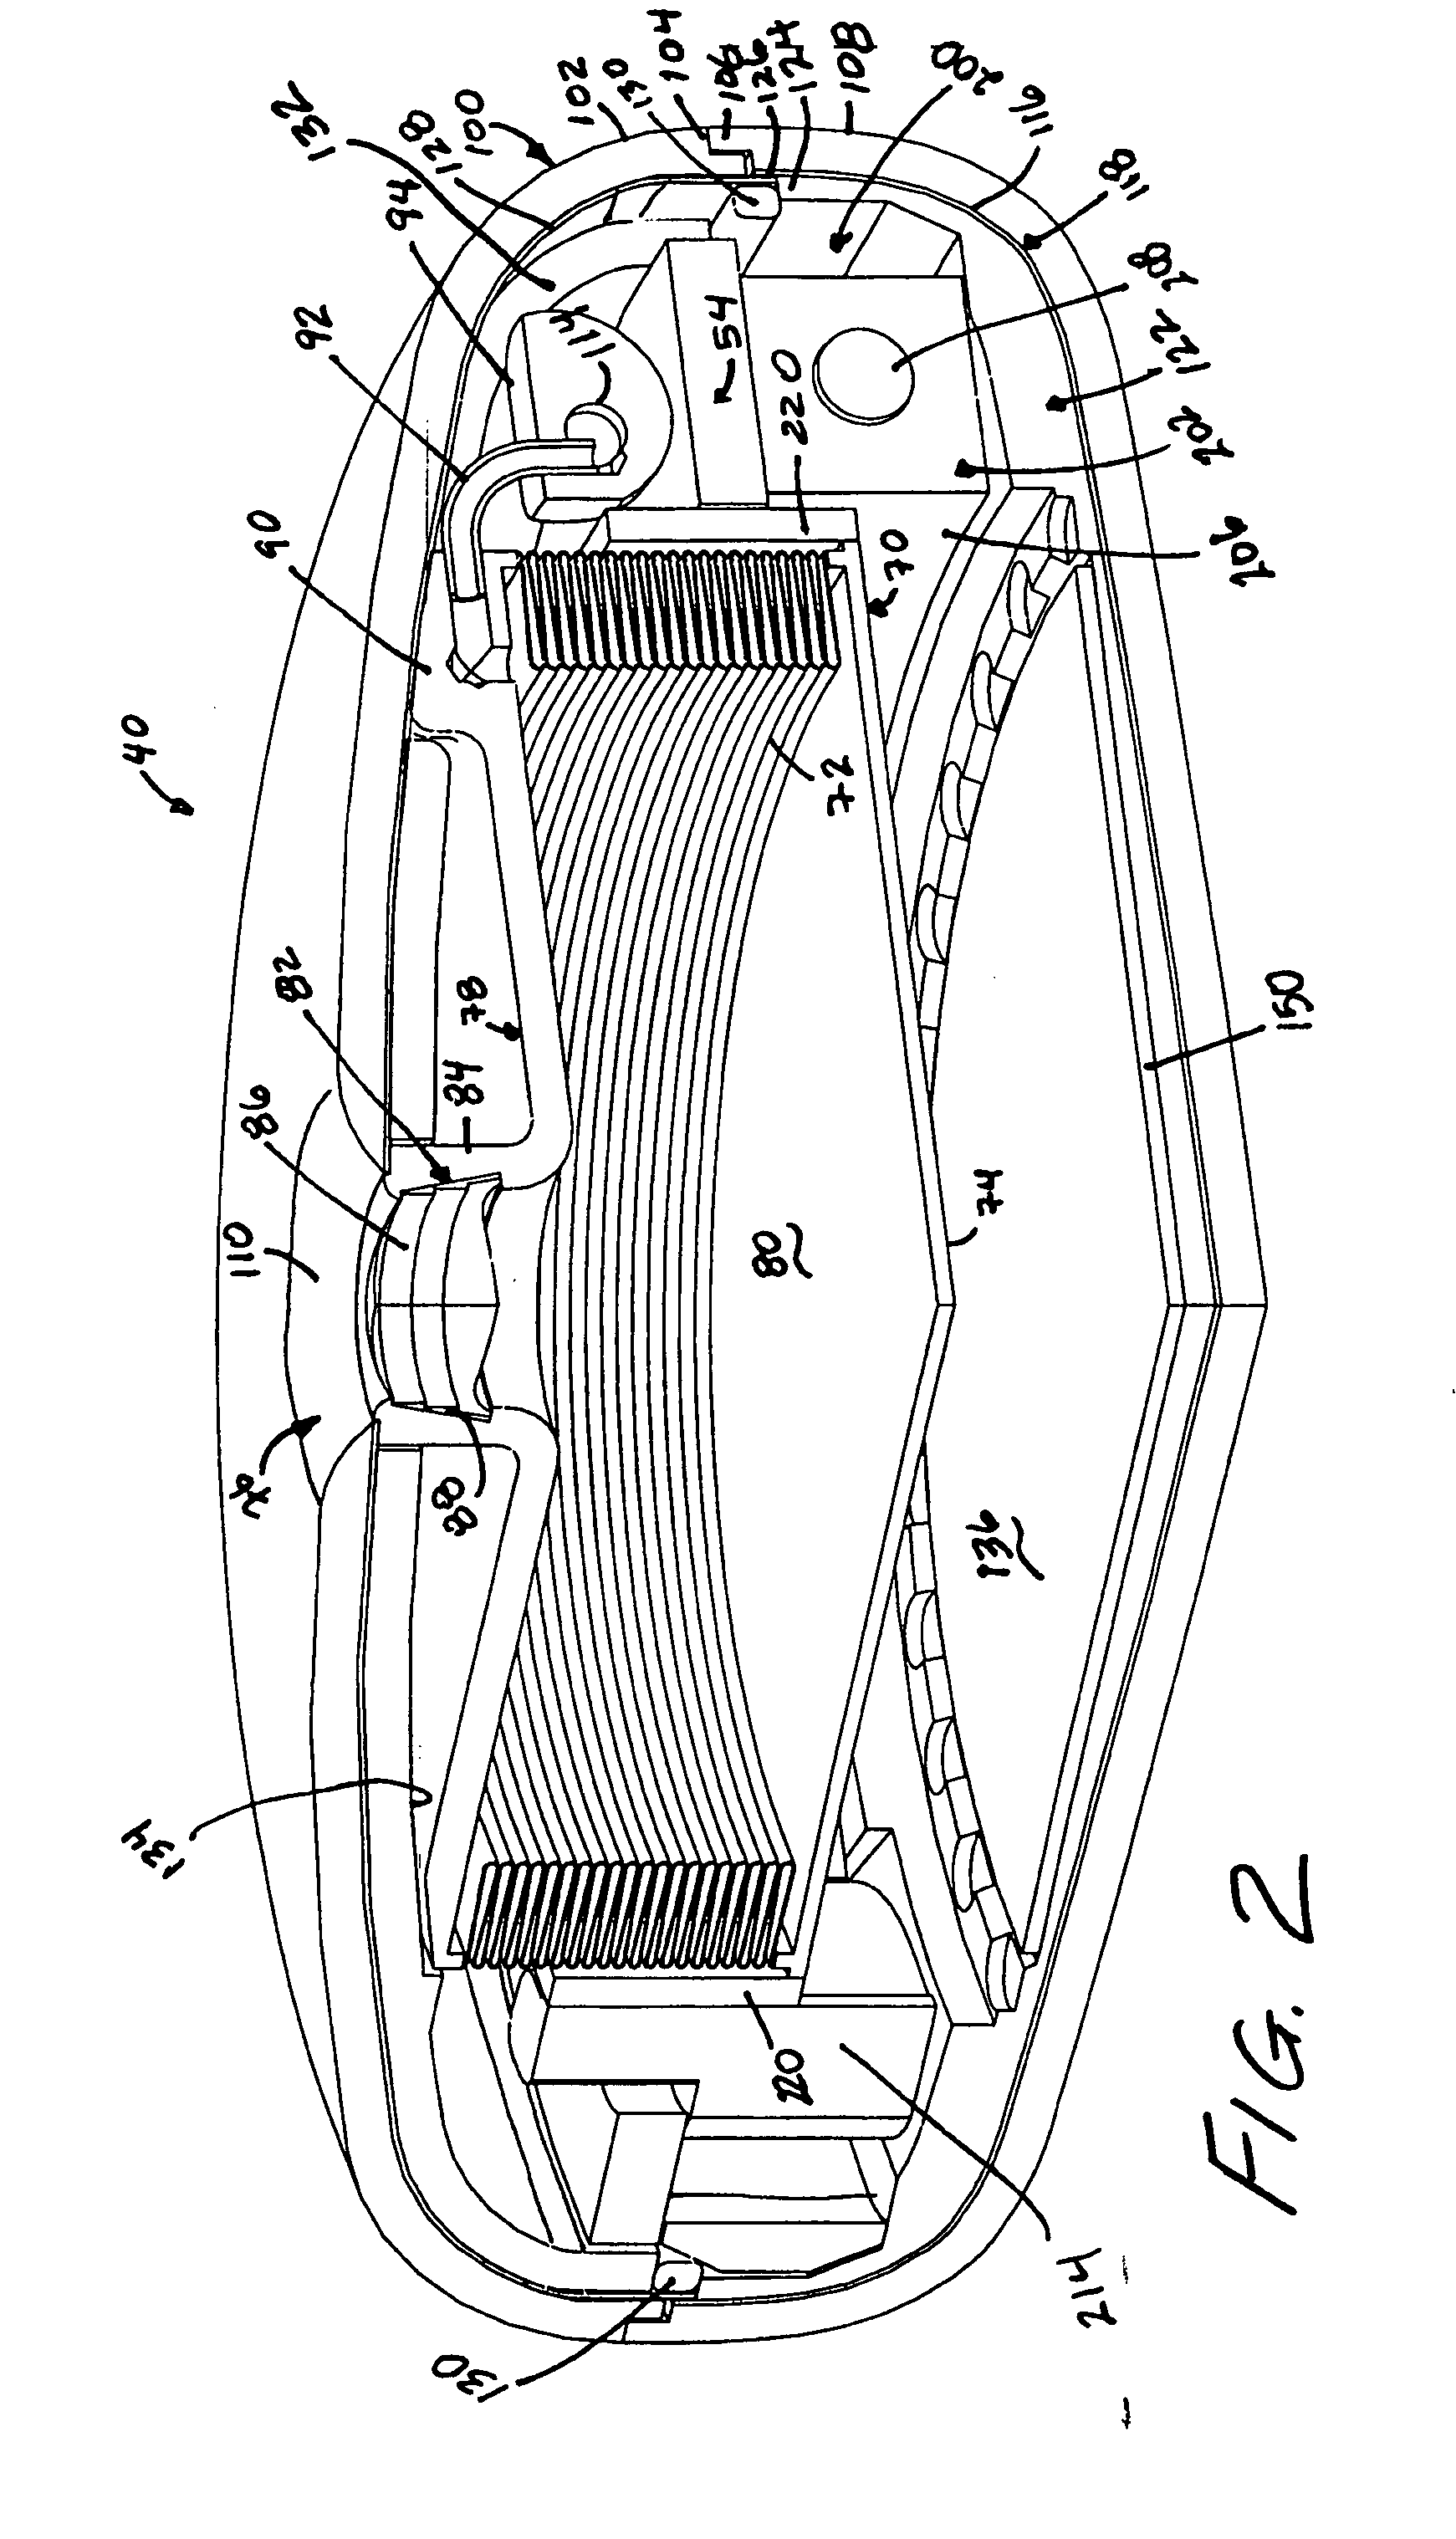 Bi-directional infuser pump with volume braking for hydraulically controlling an adjustable gastric band